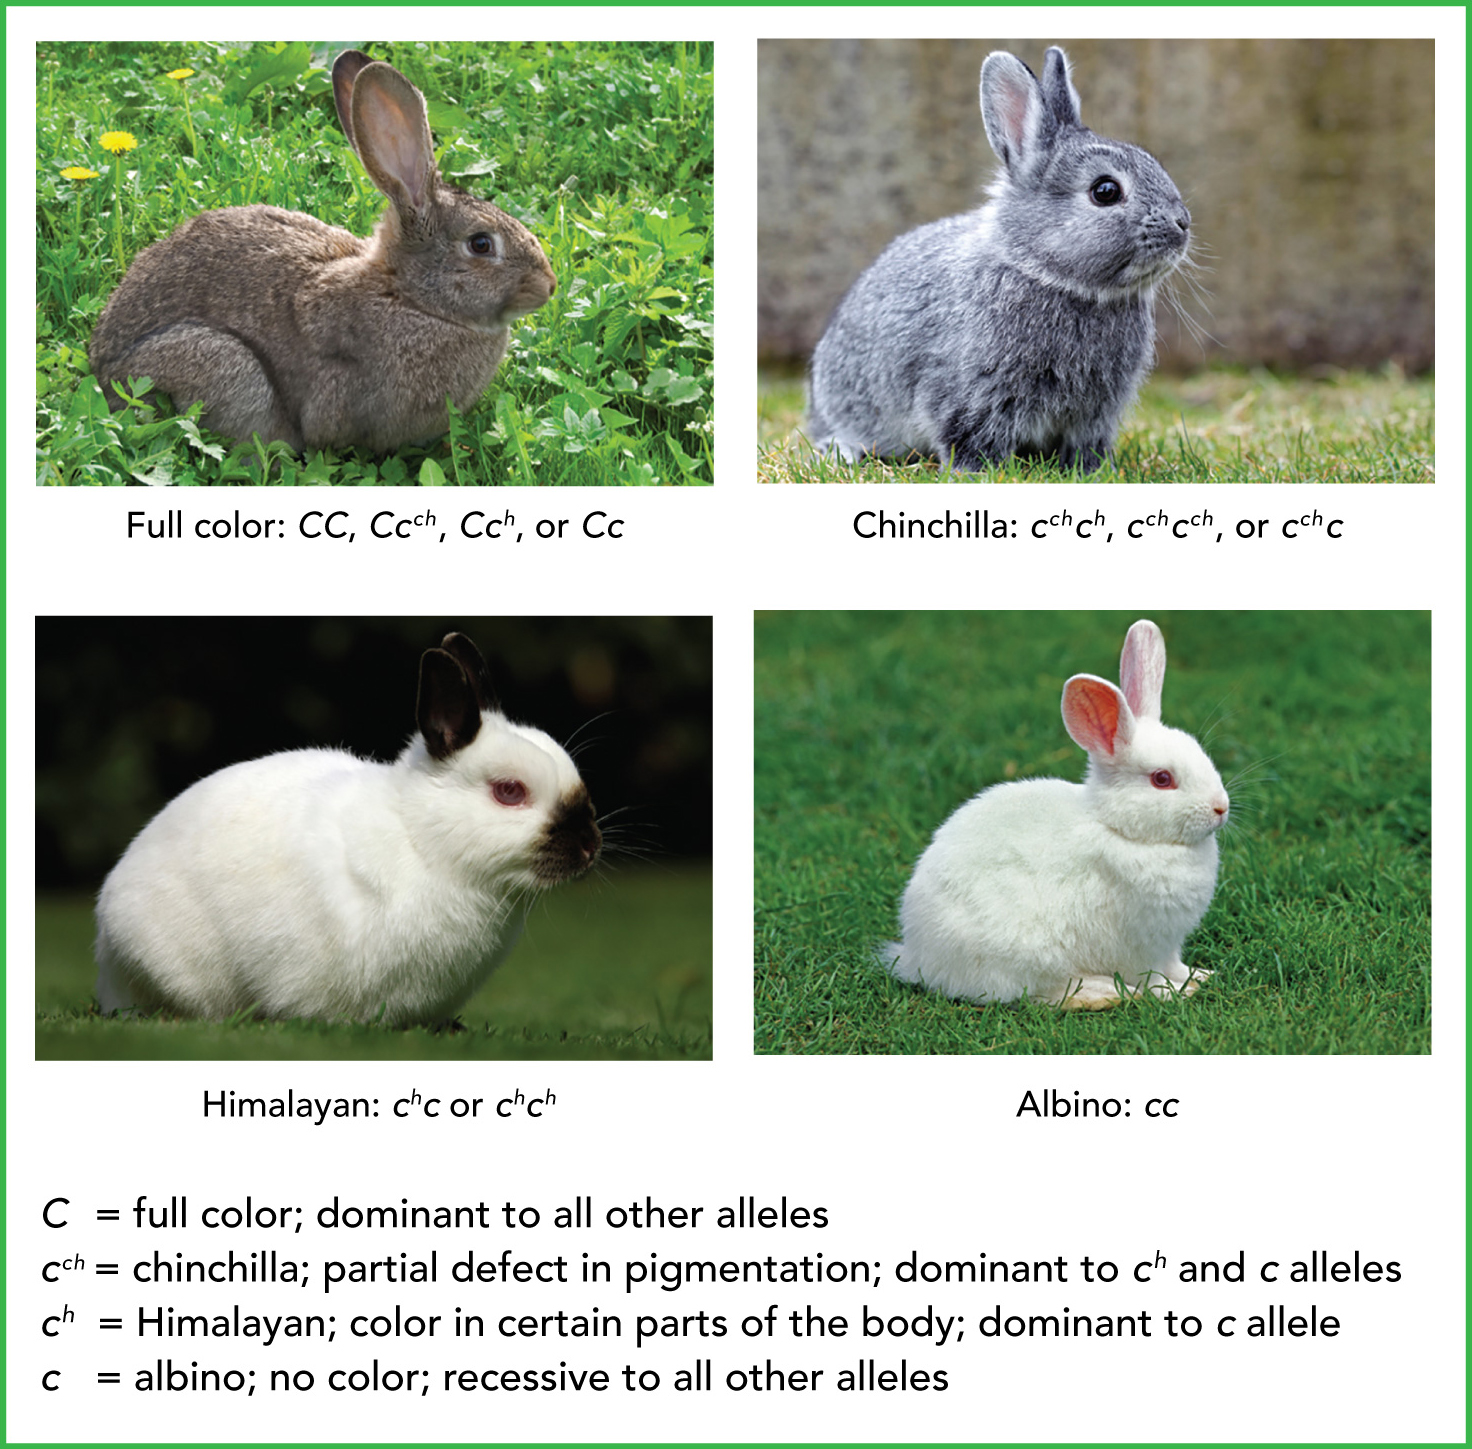 Photos of rabbits of four different colors, each with a different combination of alleles.